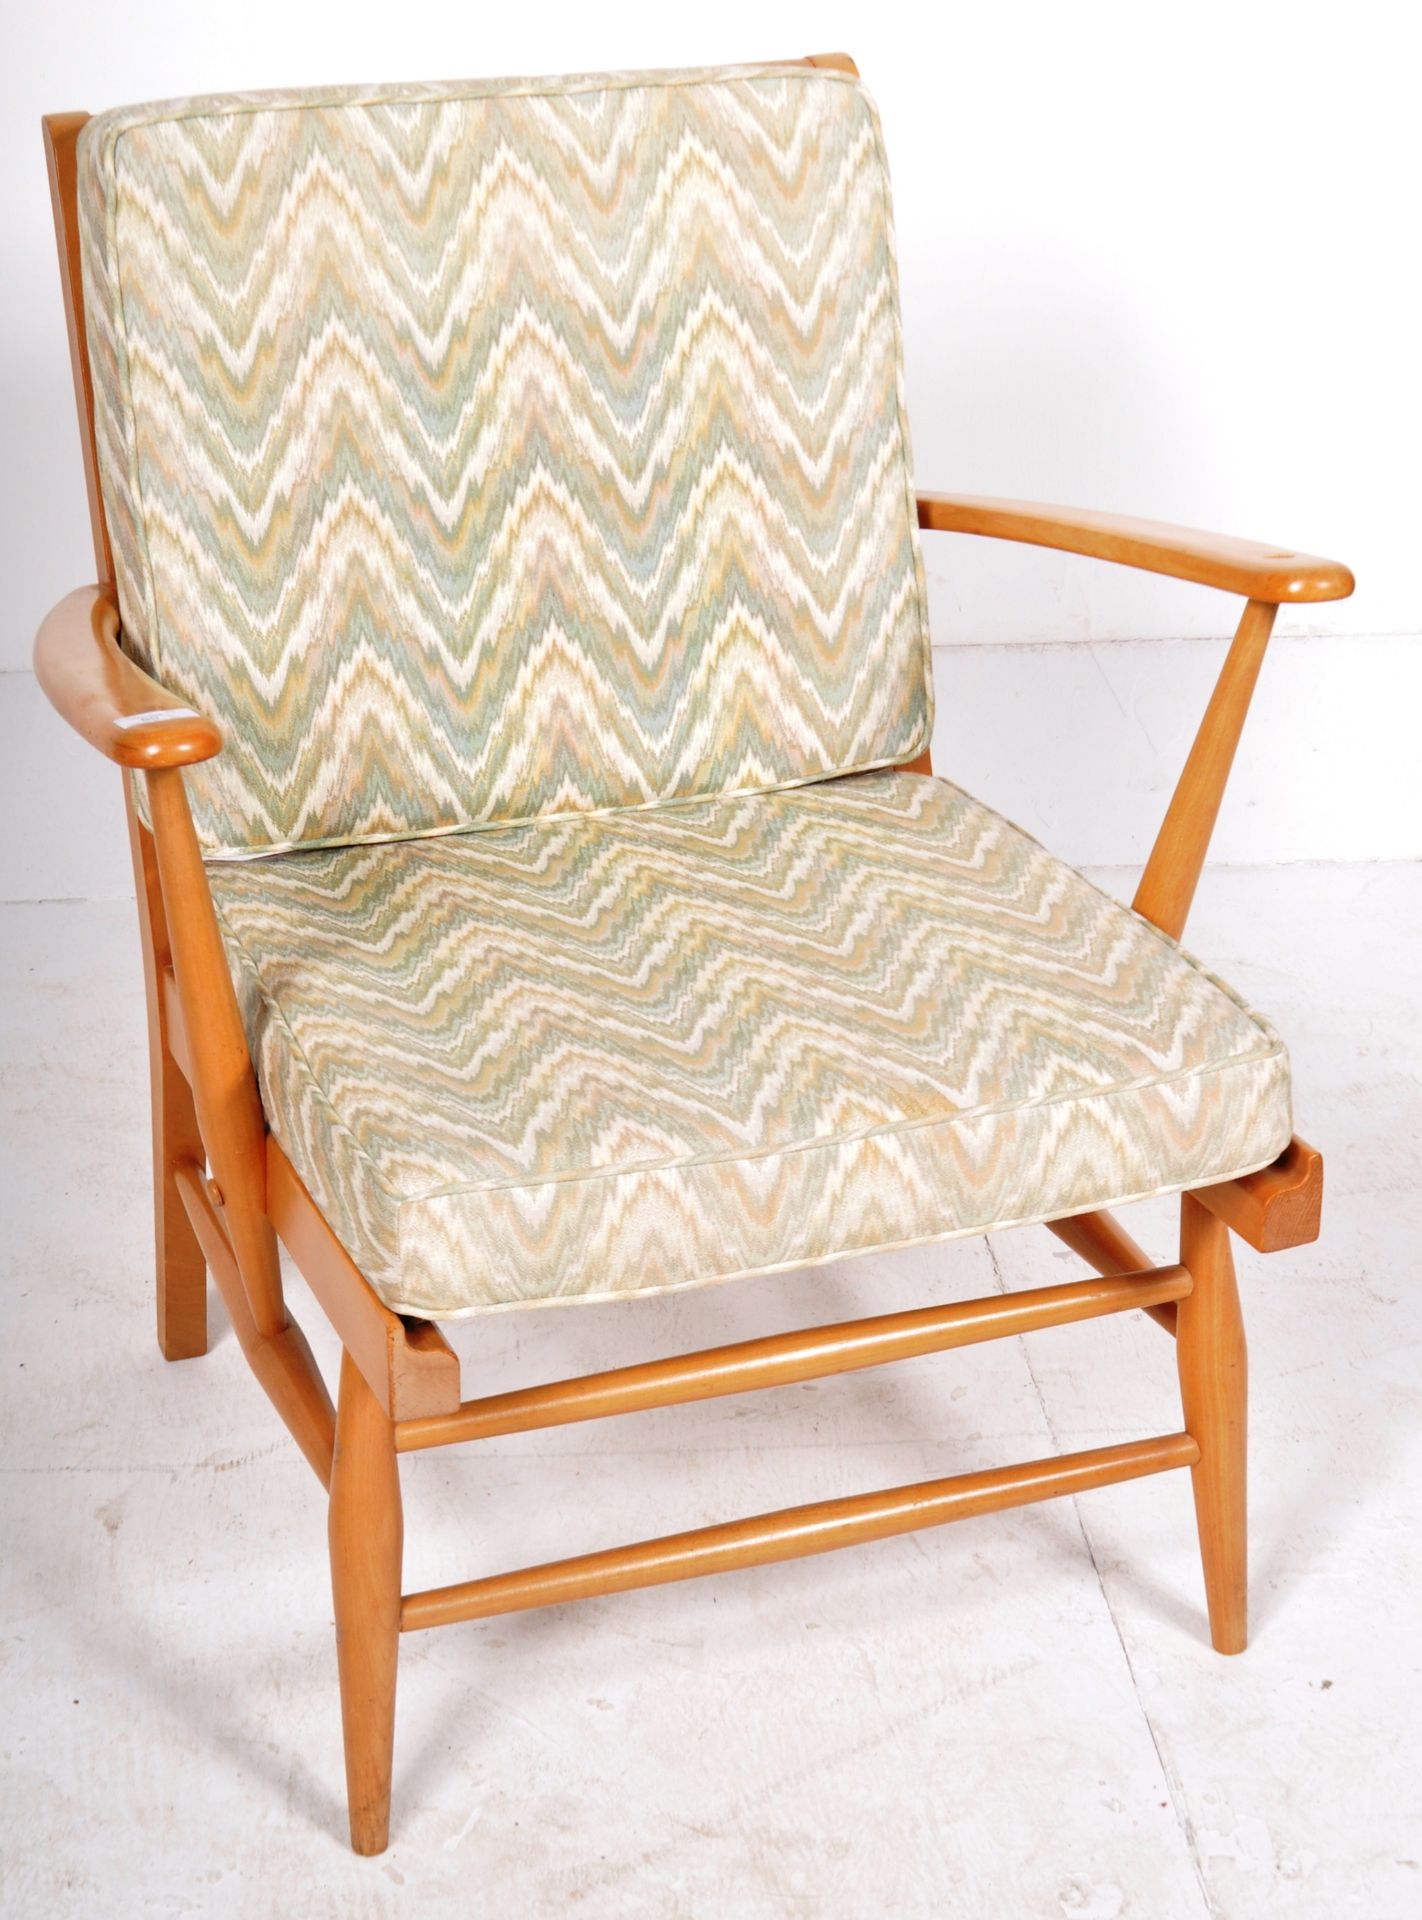 ERCOL - MODEL 567 - BEECH AND ELM EASY LOUNGE ARMCHAIR - Image 2 of 8